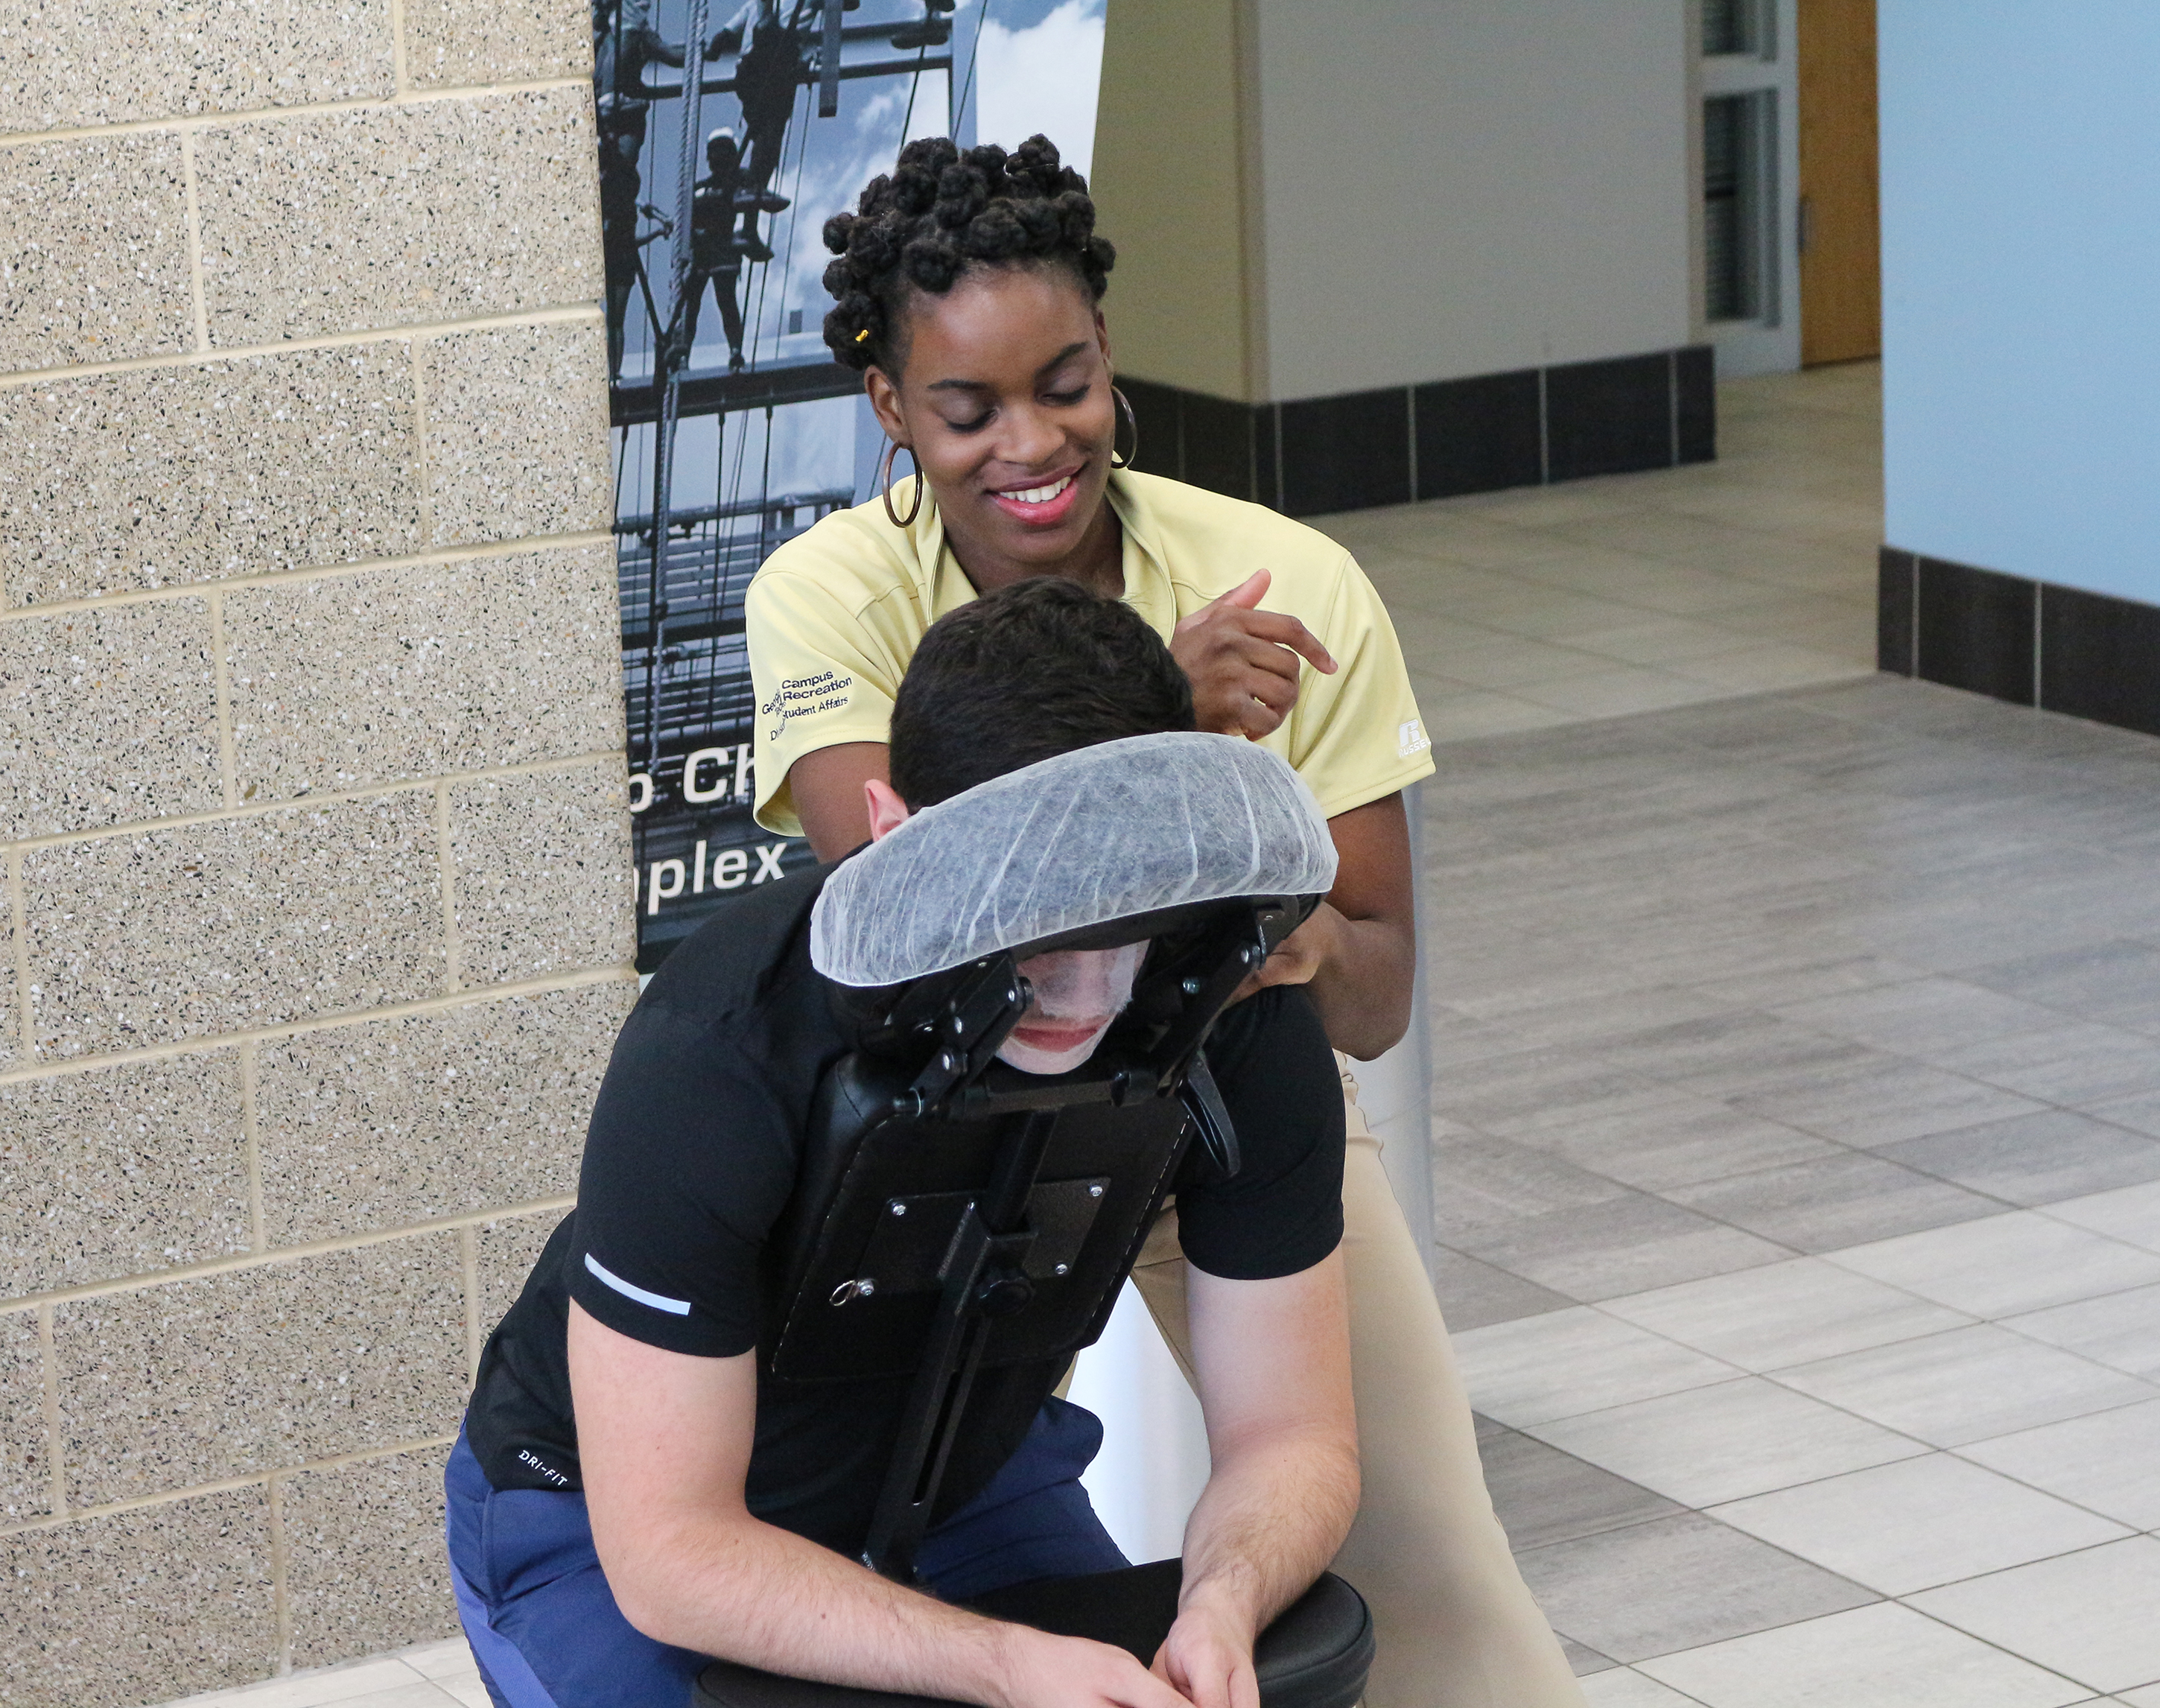 CRC provided free chair massages while promoting the new massage therapy program.